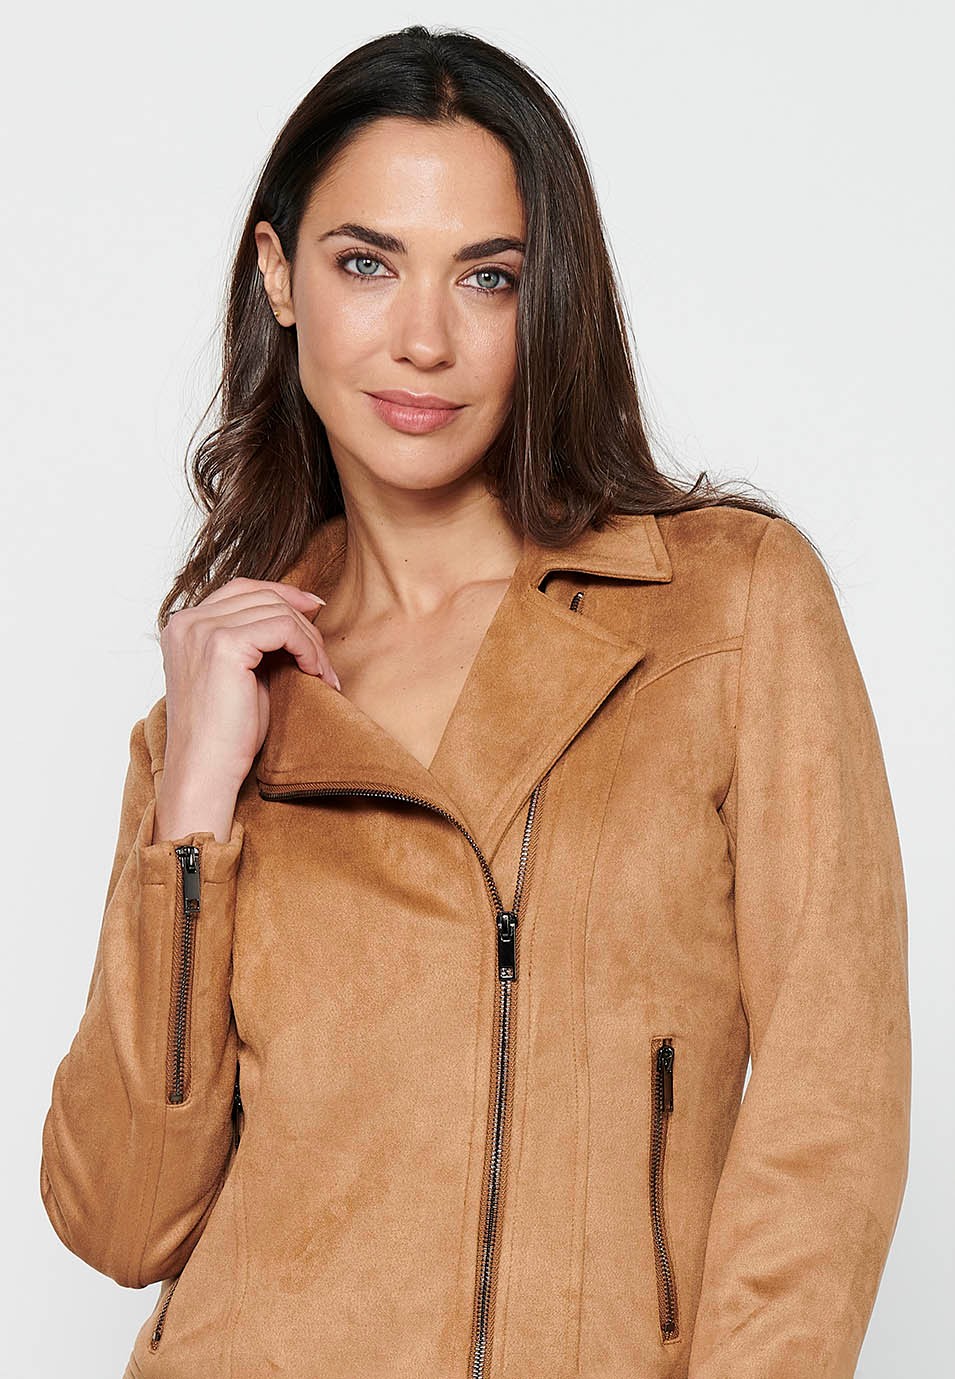 Camel Color Long Sleeve Jacket with Cross-Zip Closure with Lapel Collar and Pockets for Women 4